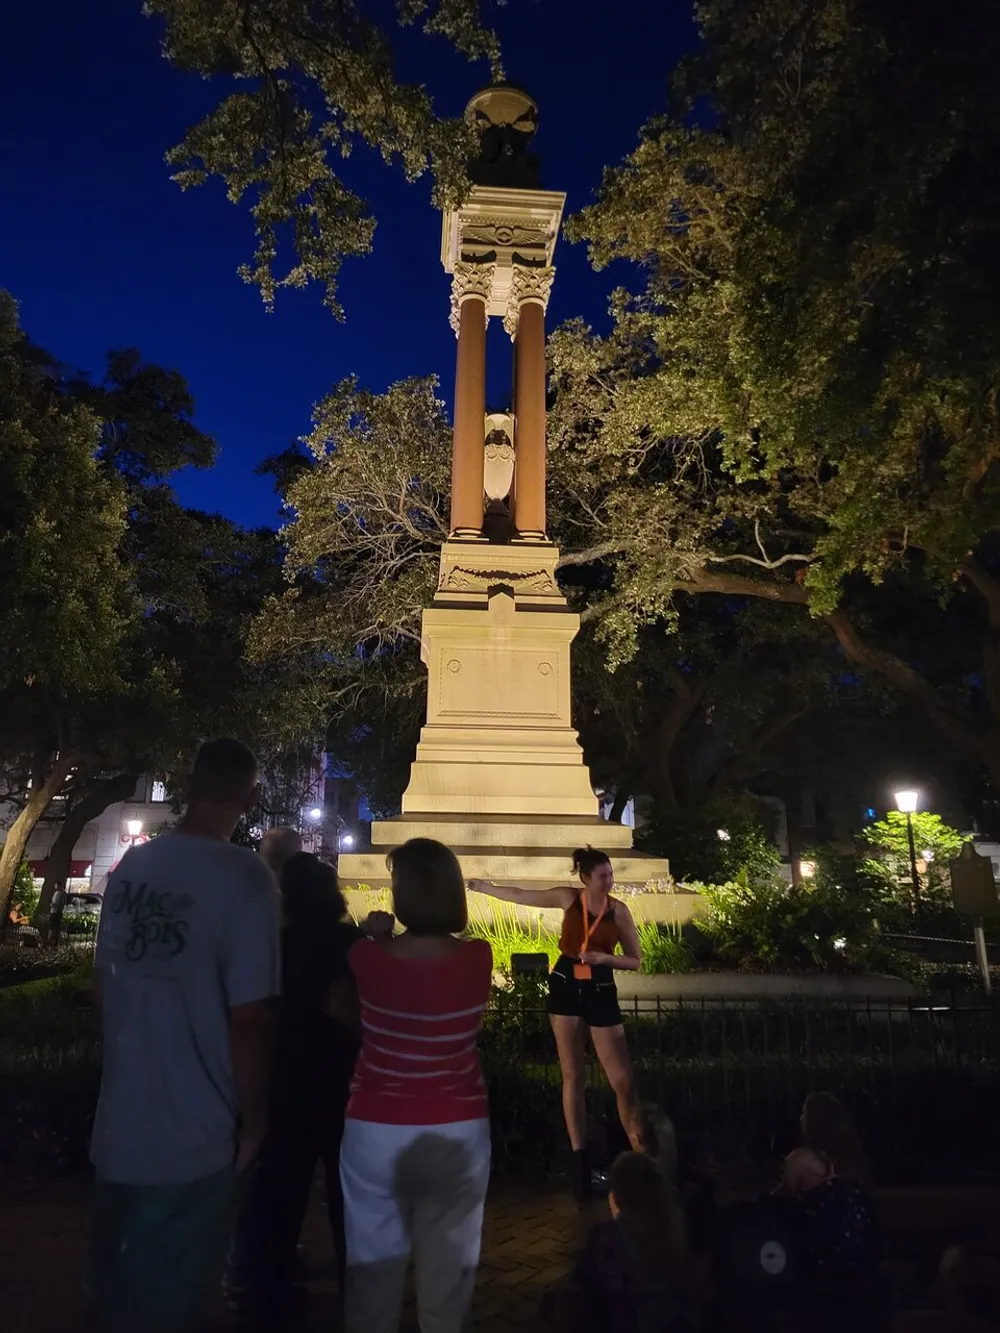 People gather around a tall monument illuminated by ambient light in a park during nighttime